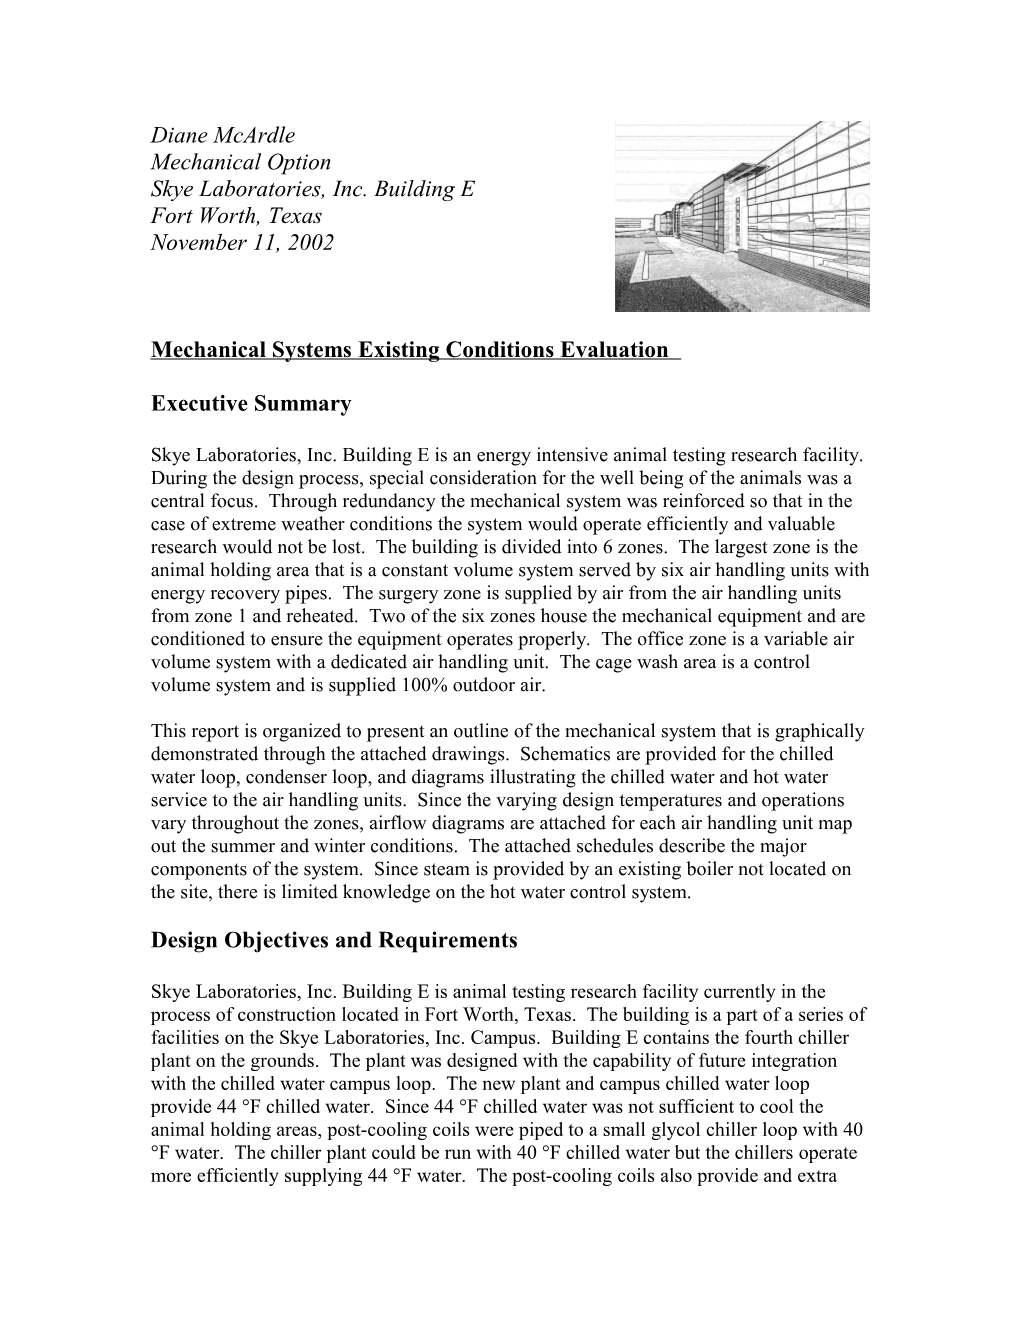 Mechanical Systems Existing Conditions Evaluation